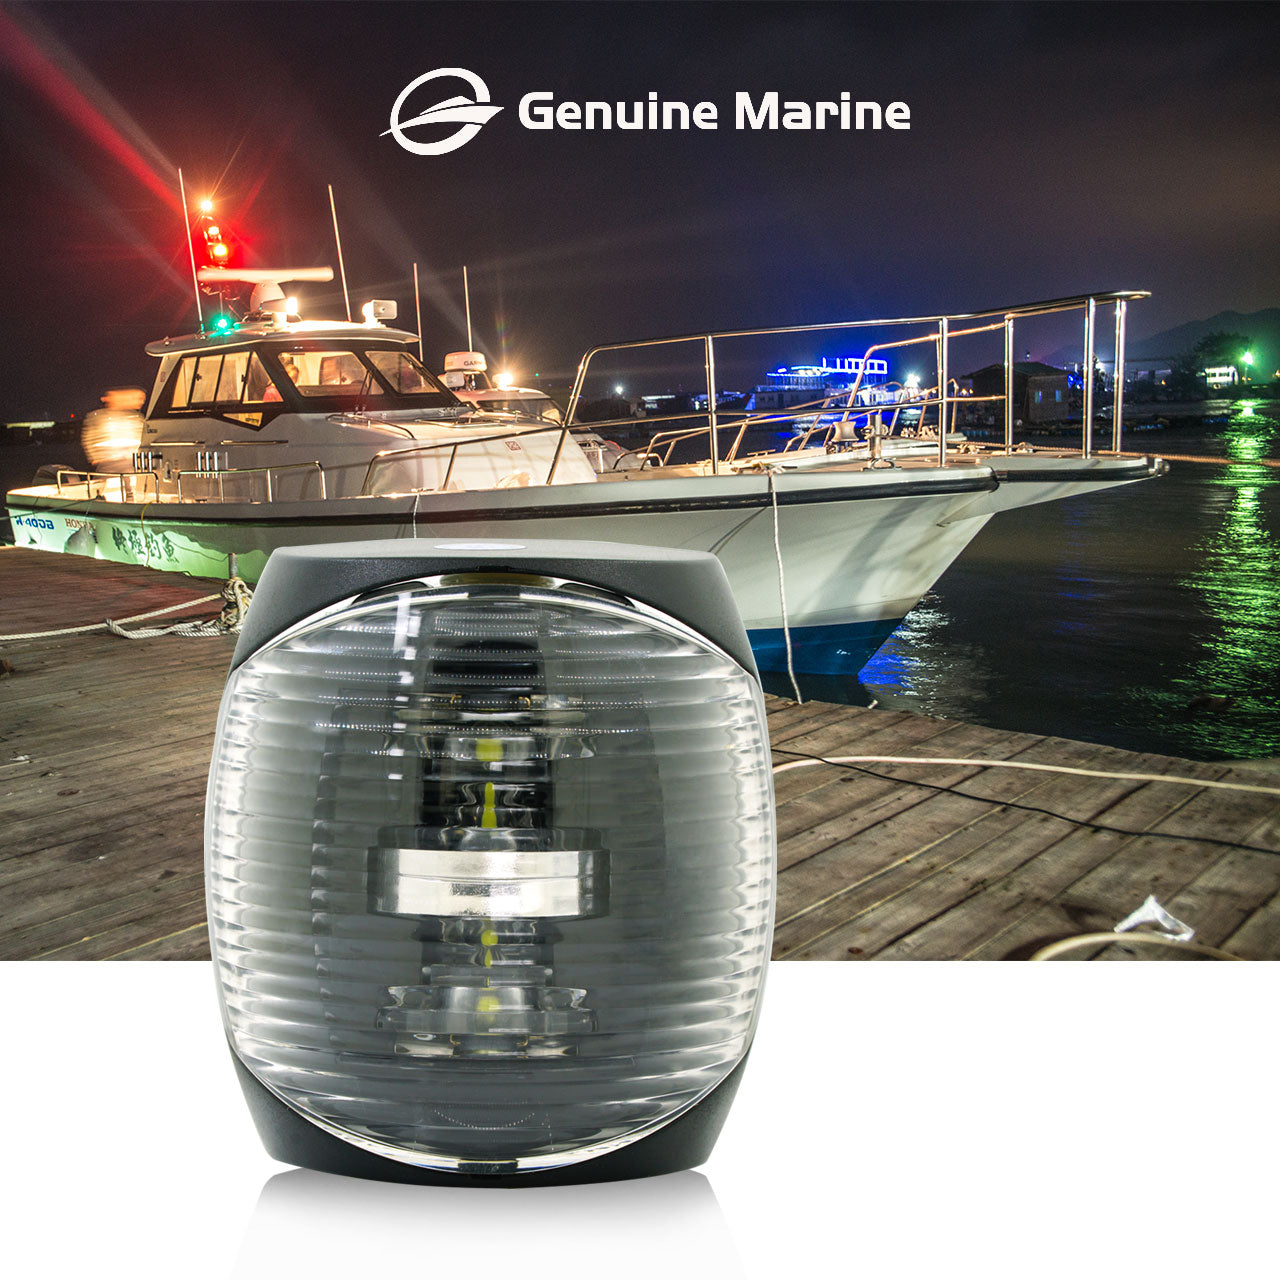 GenuineMarine 12V White LED 135° Signal Lamp Nagetive Light with US Coast Guard, ABYC A-16 and CE Certifications for Yacht Boat - THALASSA